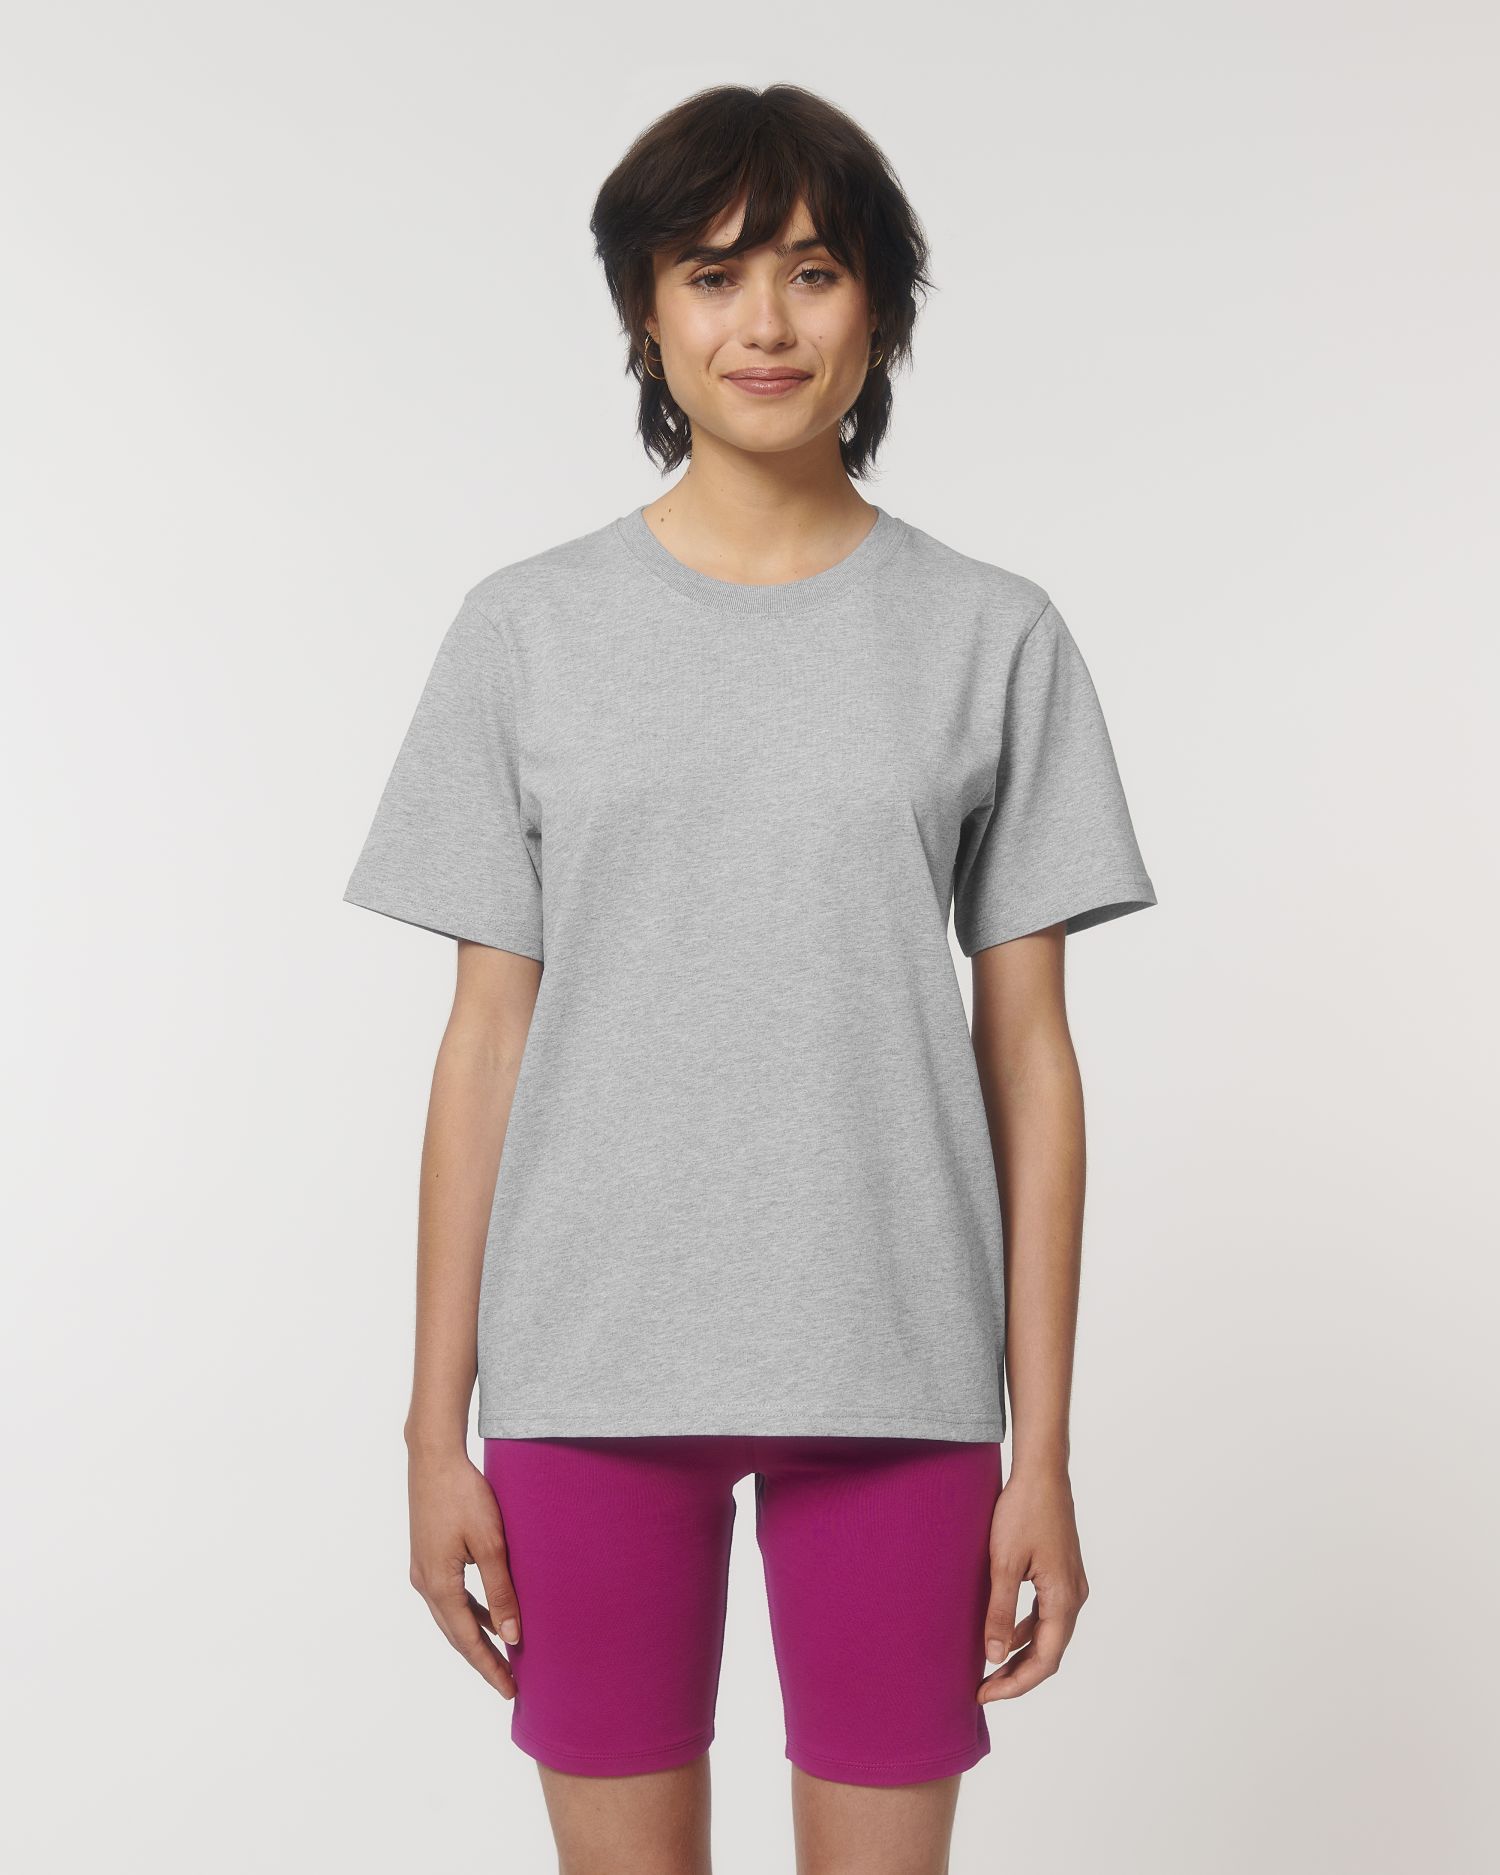 T-Shirt Stanley Sparker in Farbe Heather Grey